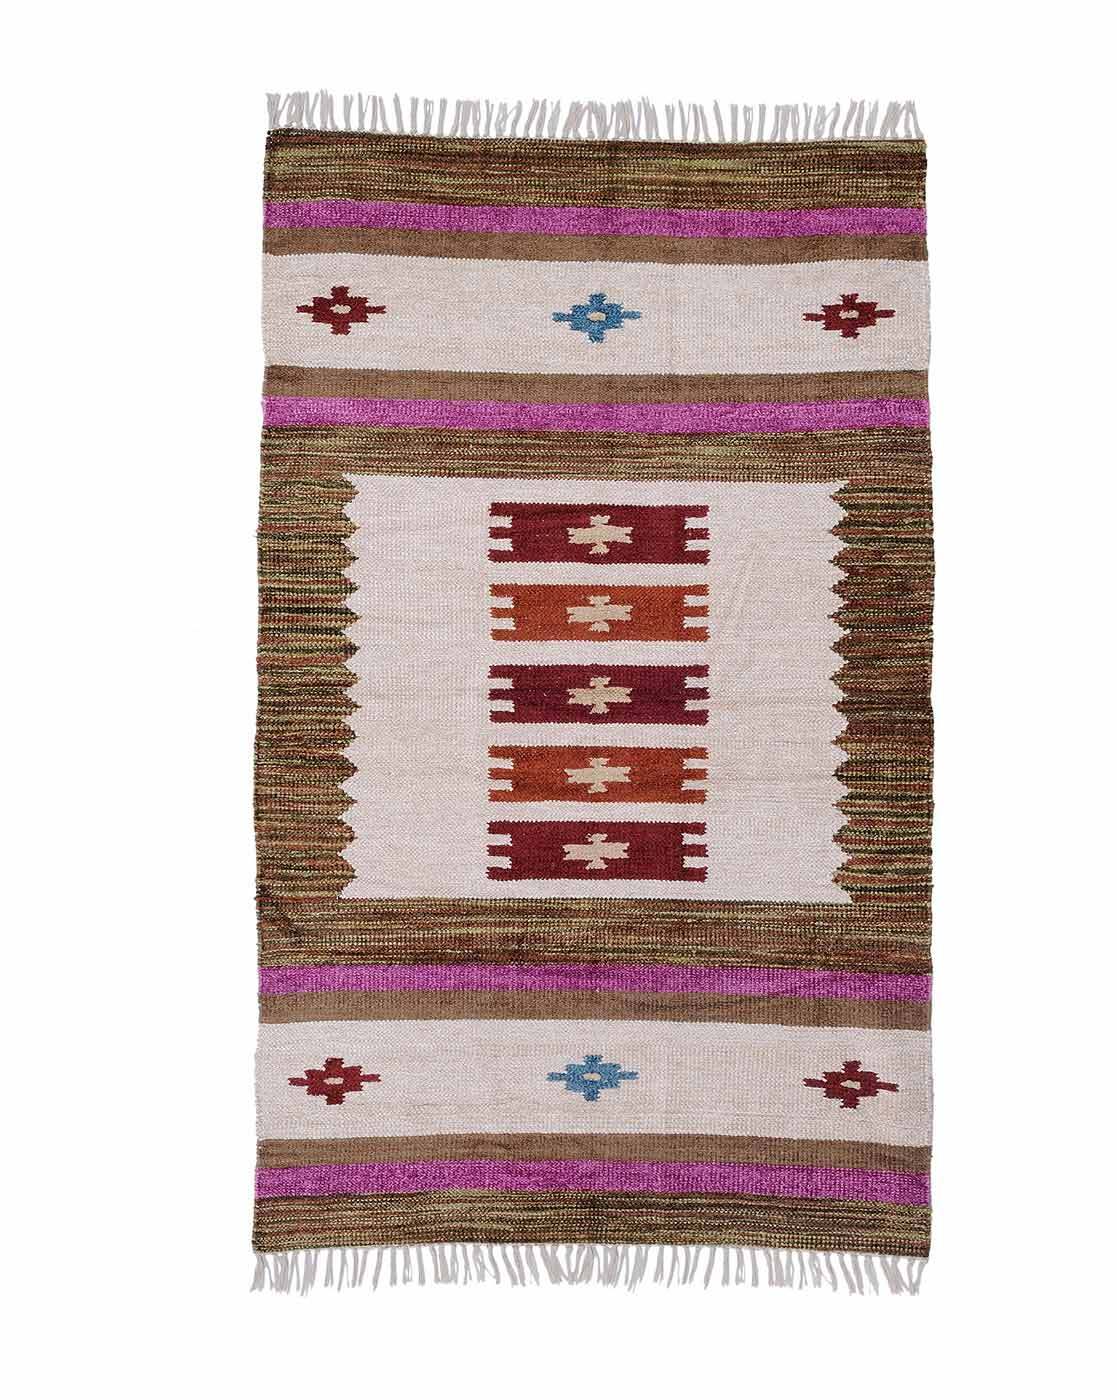 Buy Ddecor-Abstract-Red-Medium-RUG-ROSSINI-361-BO1-V-M Online at Low Prices  in India - .in